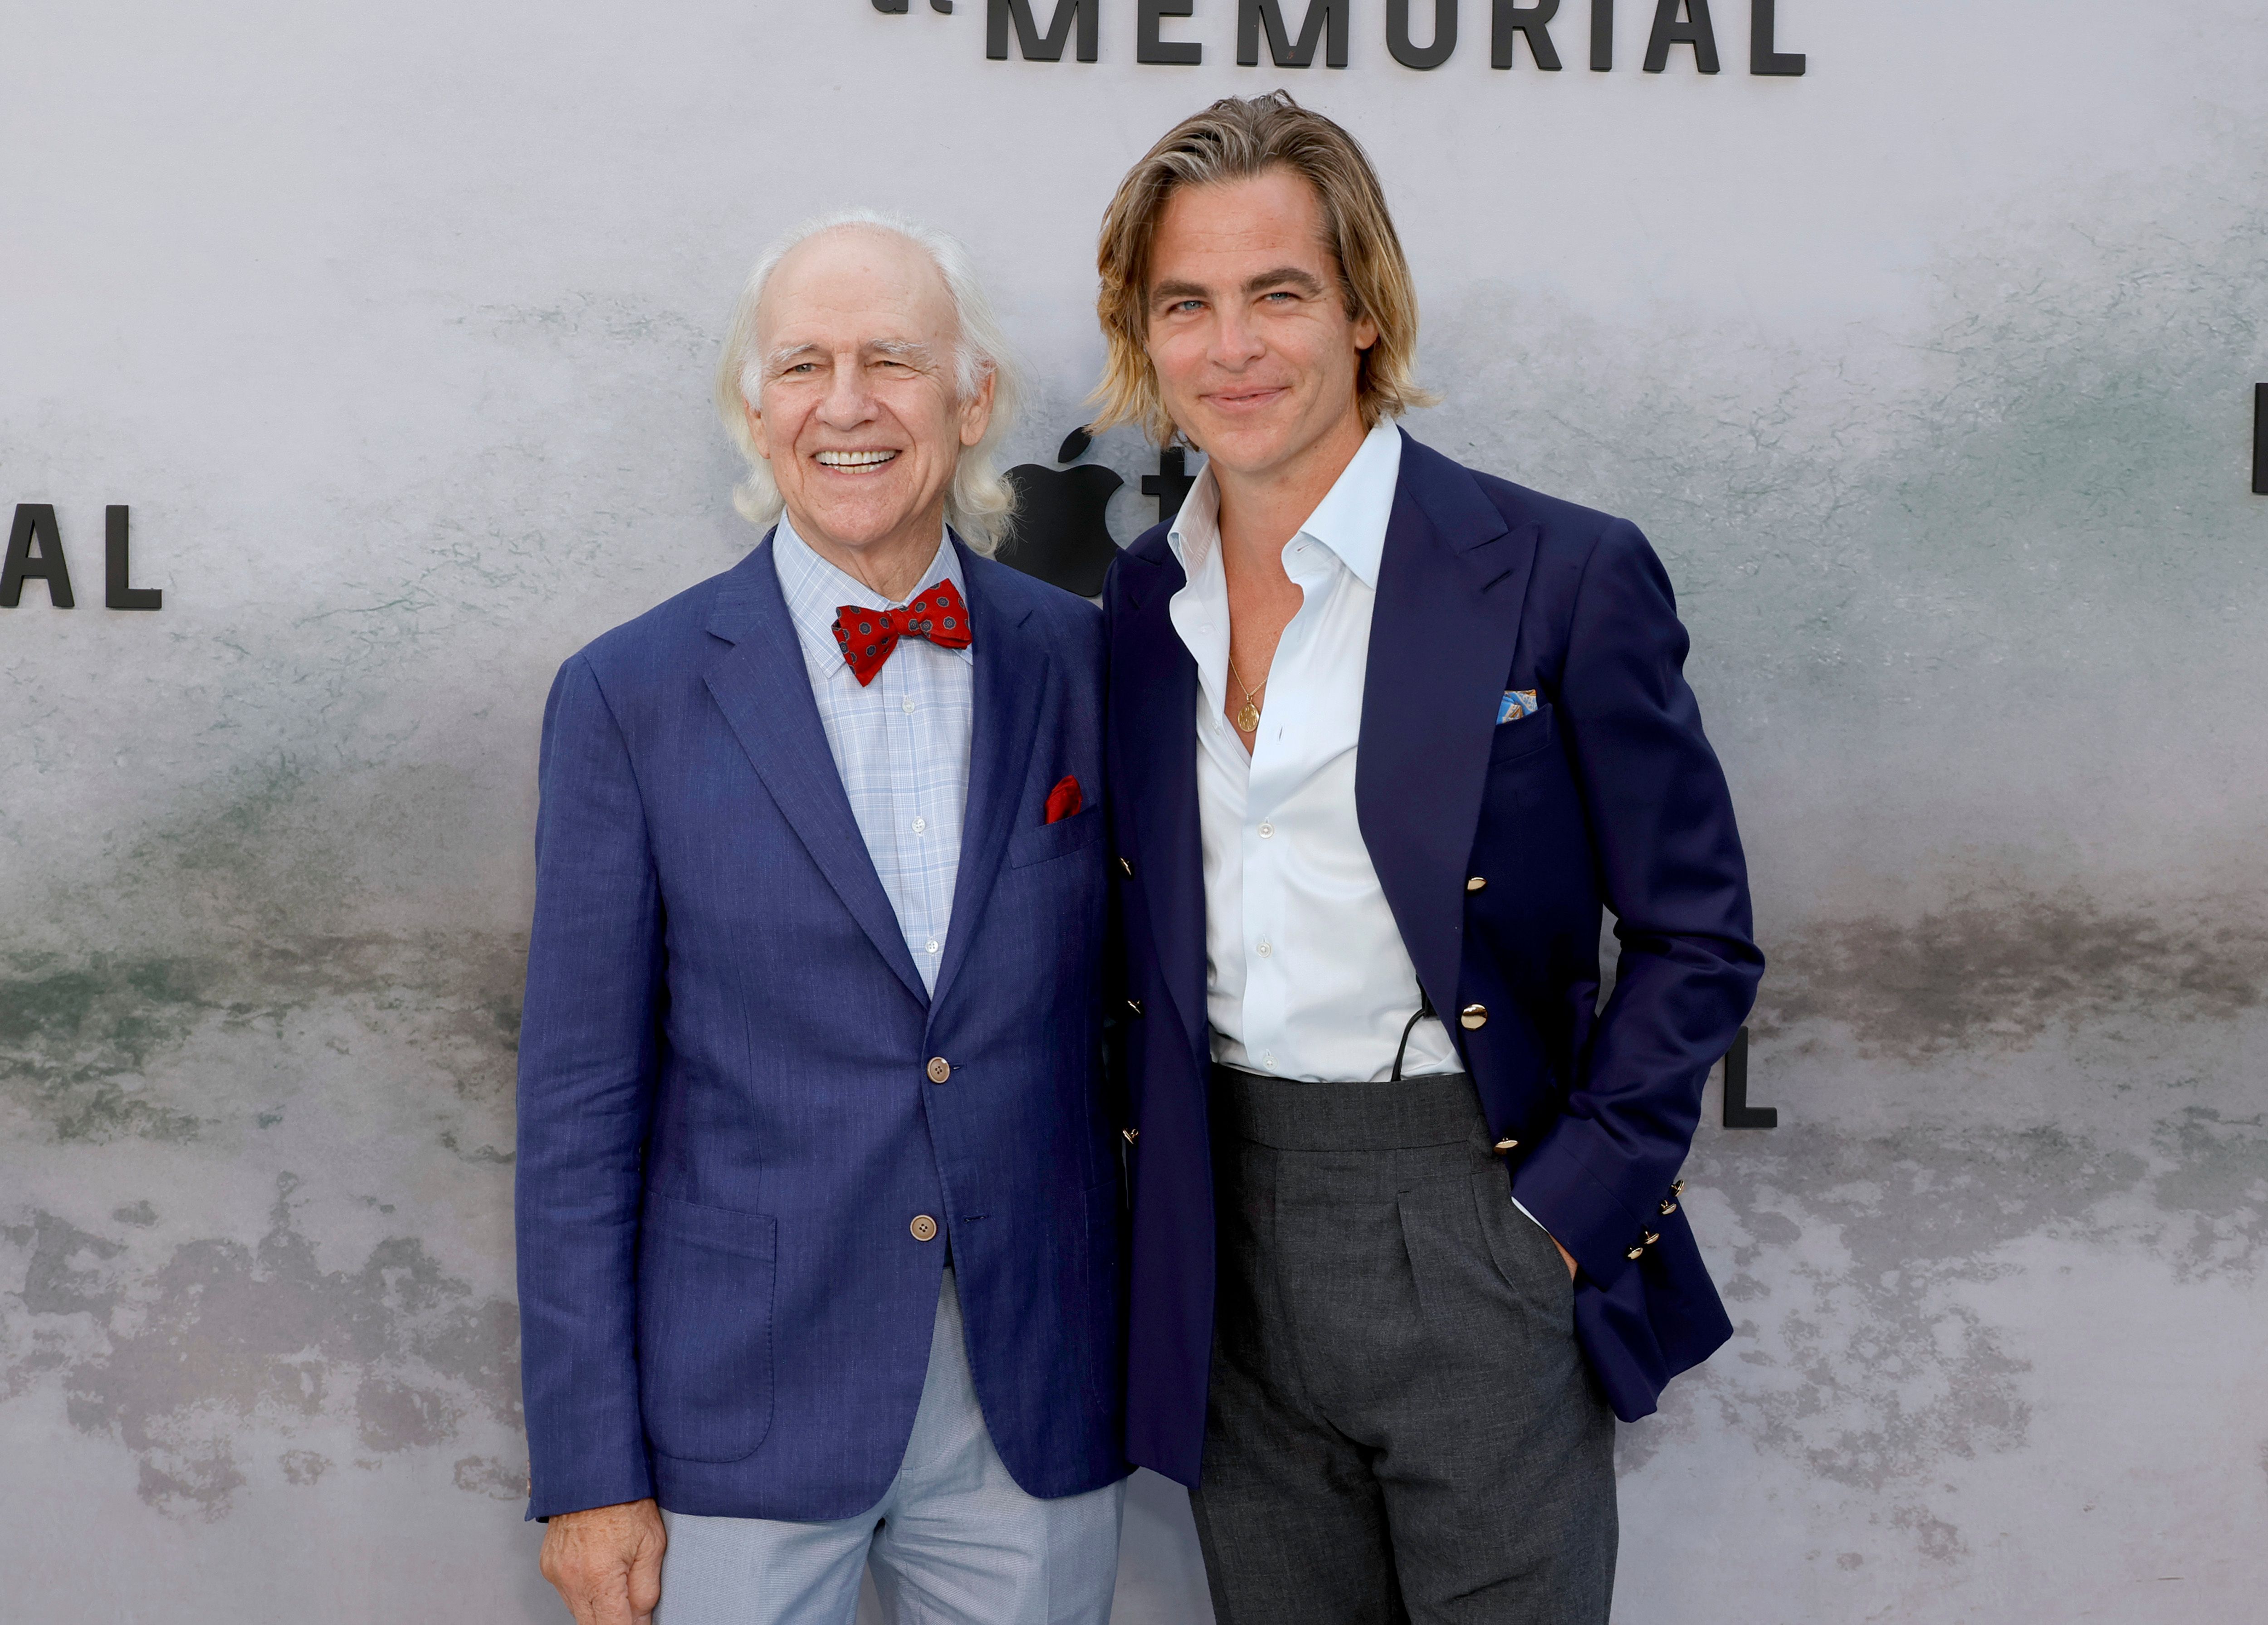 Robert Pine and Chris Pine at the Apple TV+ limited series "Five Days At Memorial" red carpet event on August 8, 2022, in Los Angeles, California. | Source: Getty Images